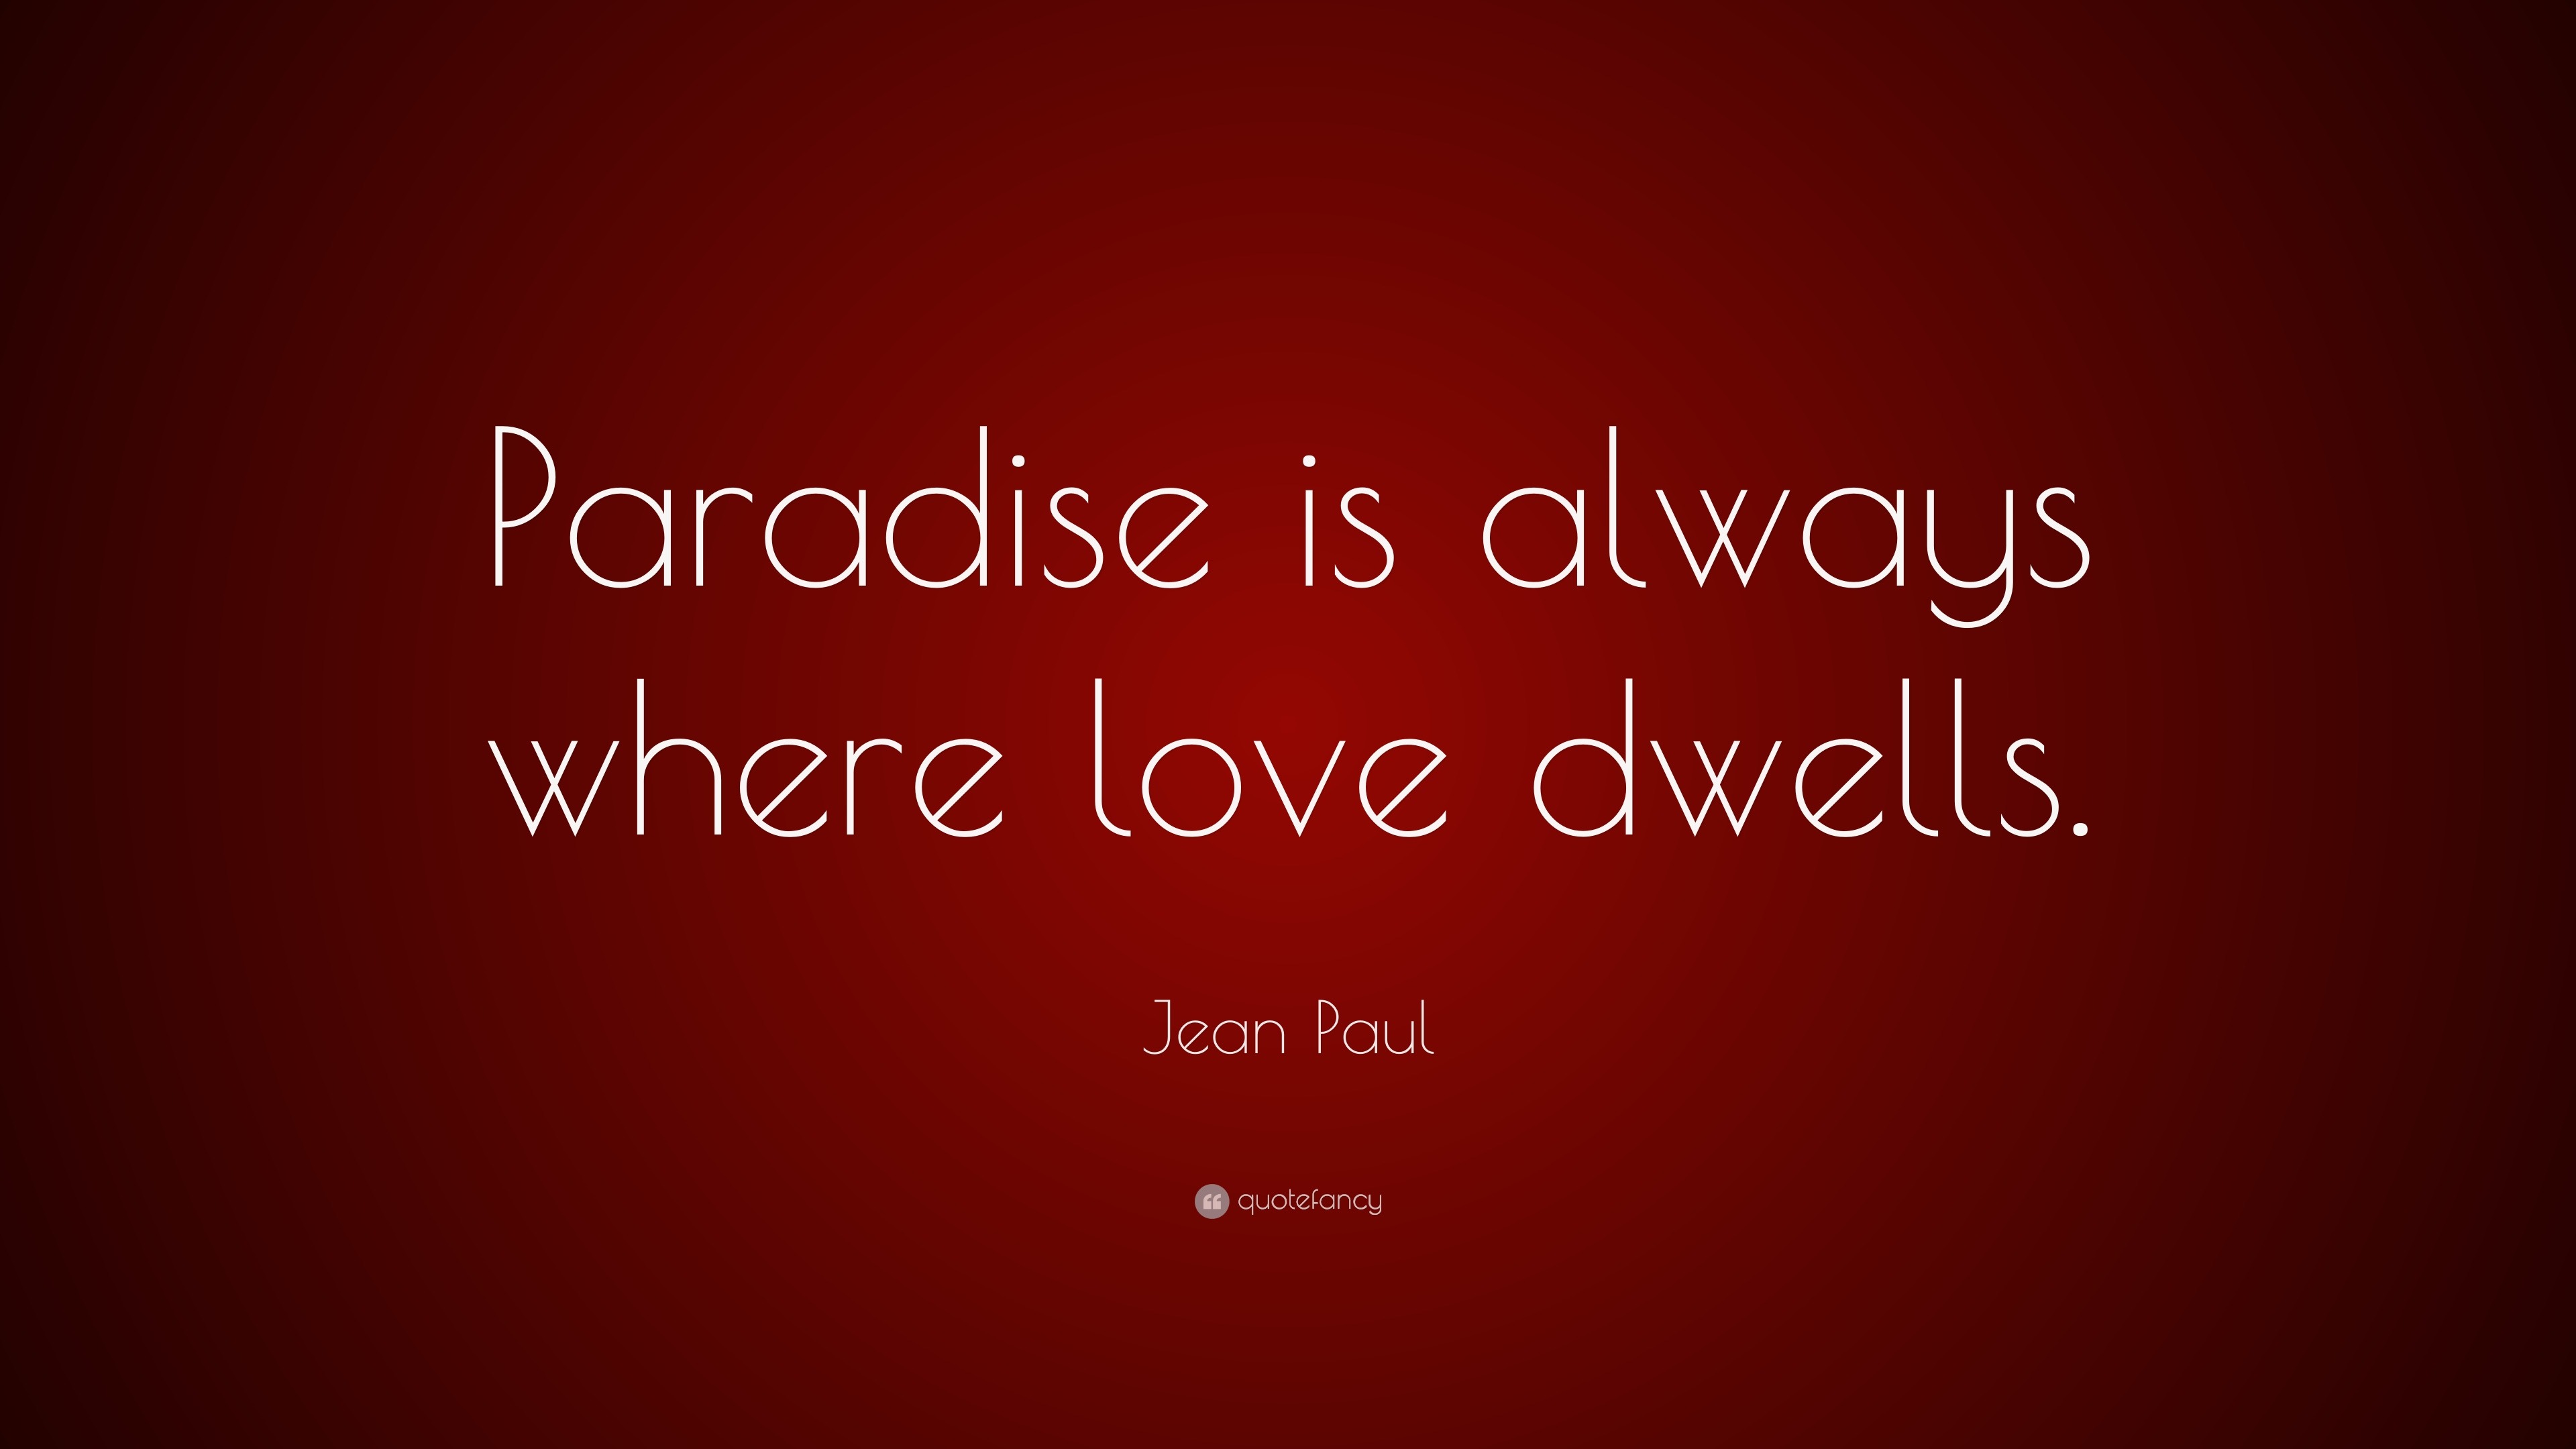 Jean Paul Quote: "Paradise is always where love dwells." (7 wallpapers) - Quotefancy